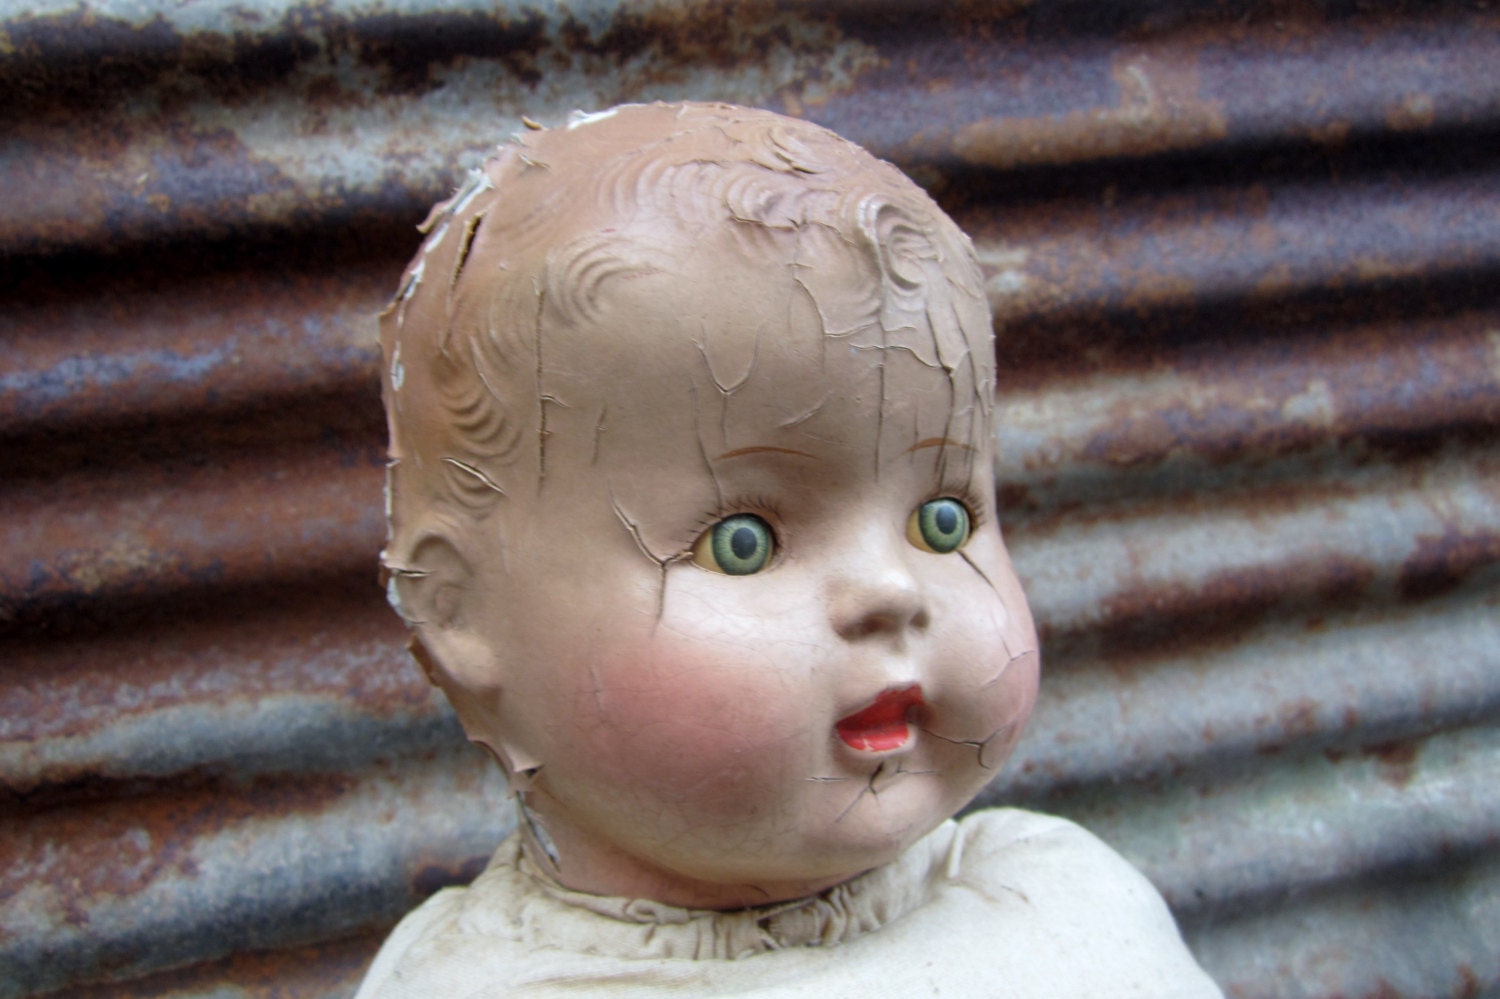 Antique Toy Baby Doll Little Boy Victorian with Opening Eyes Creepy Scarey Halloween Prop or Decoration Zombie Child - TheOldTimeJunkShop